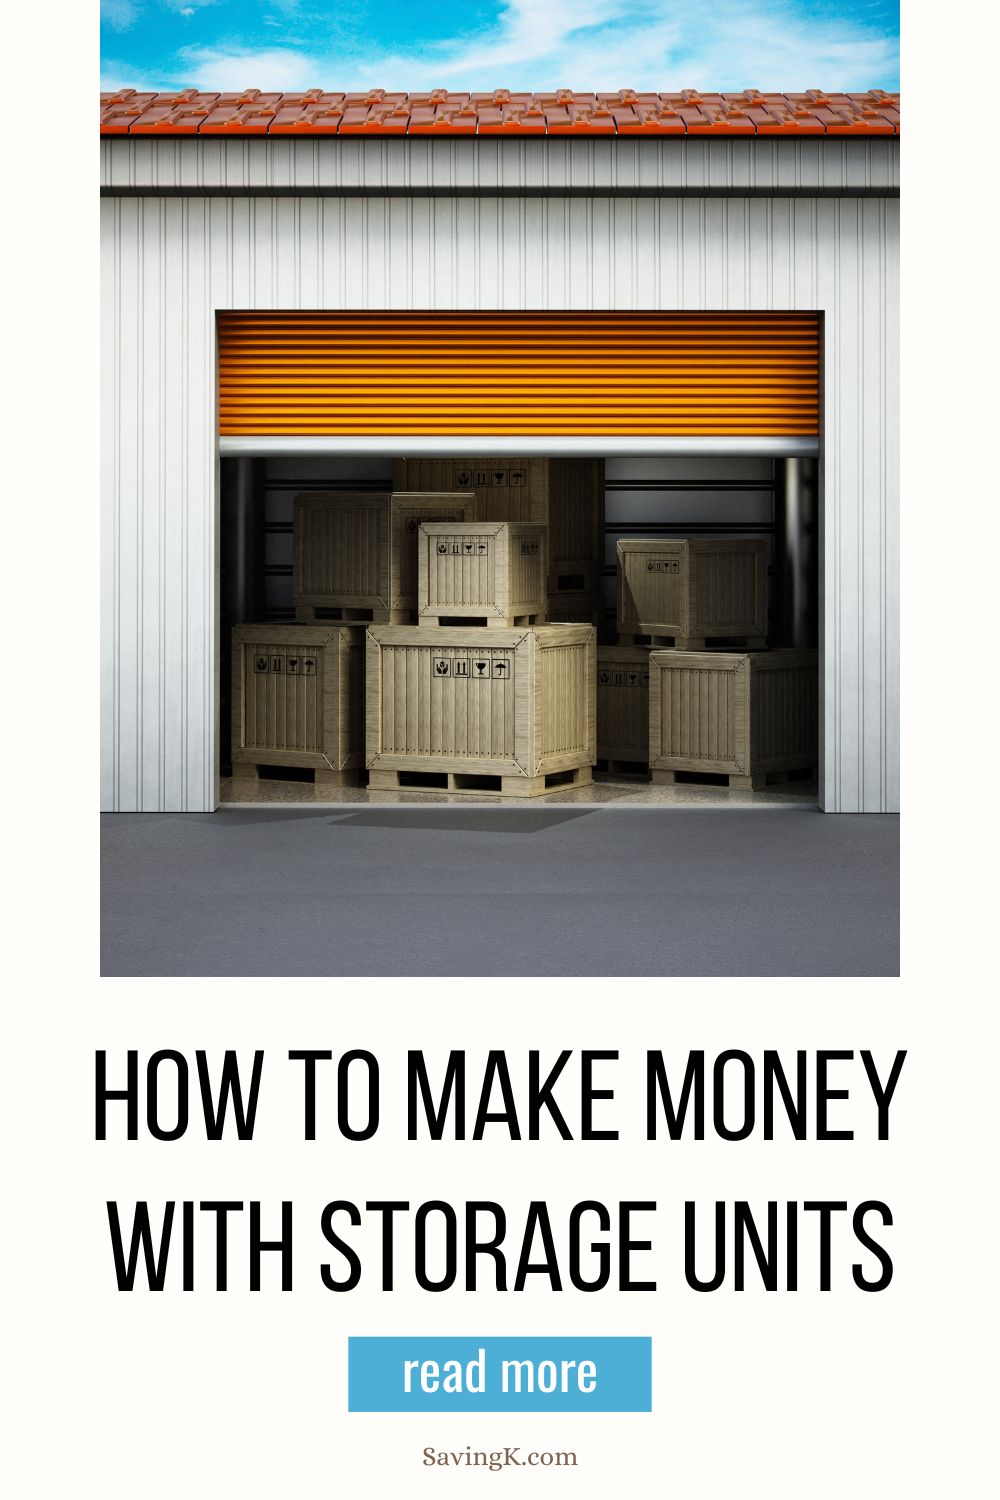 How To Make Money with Storage Units